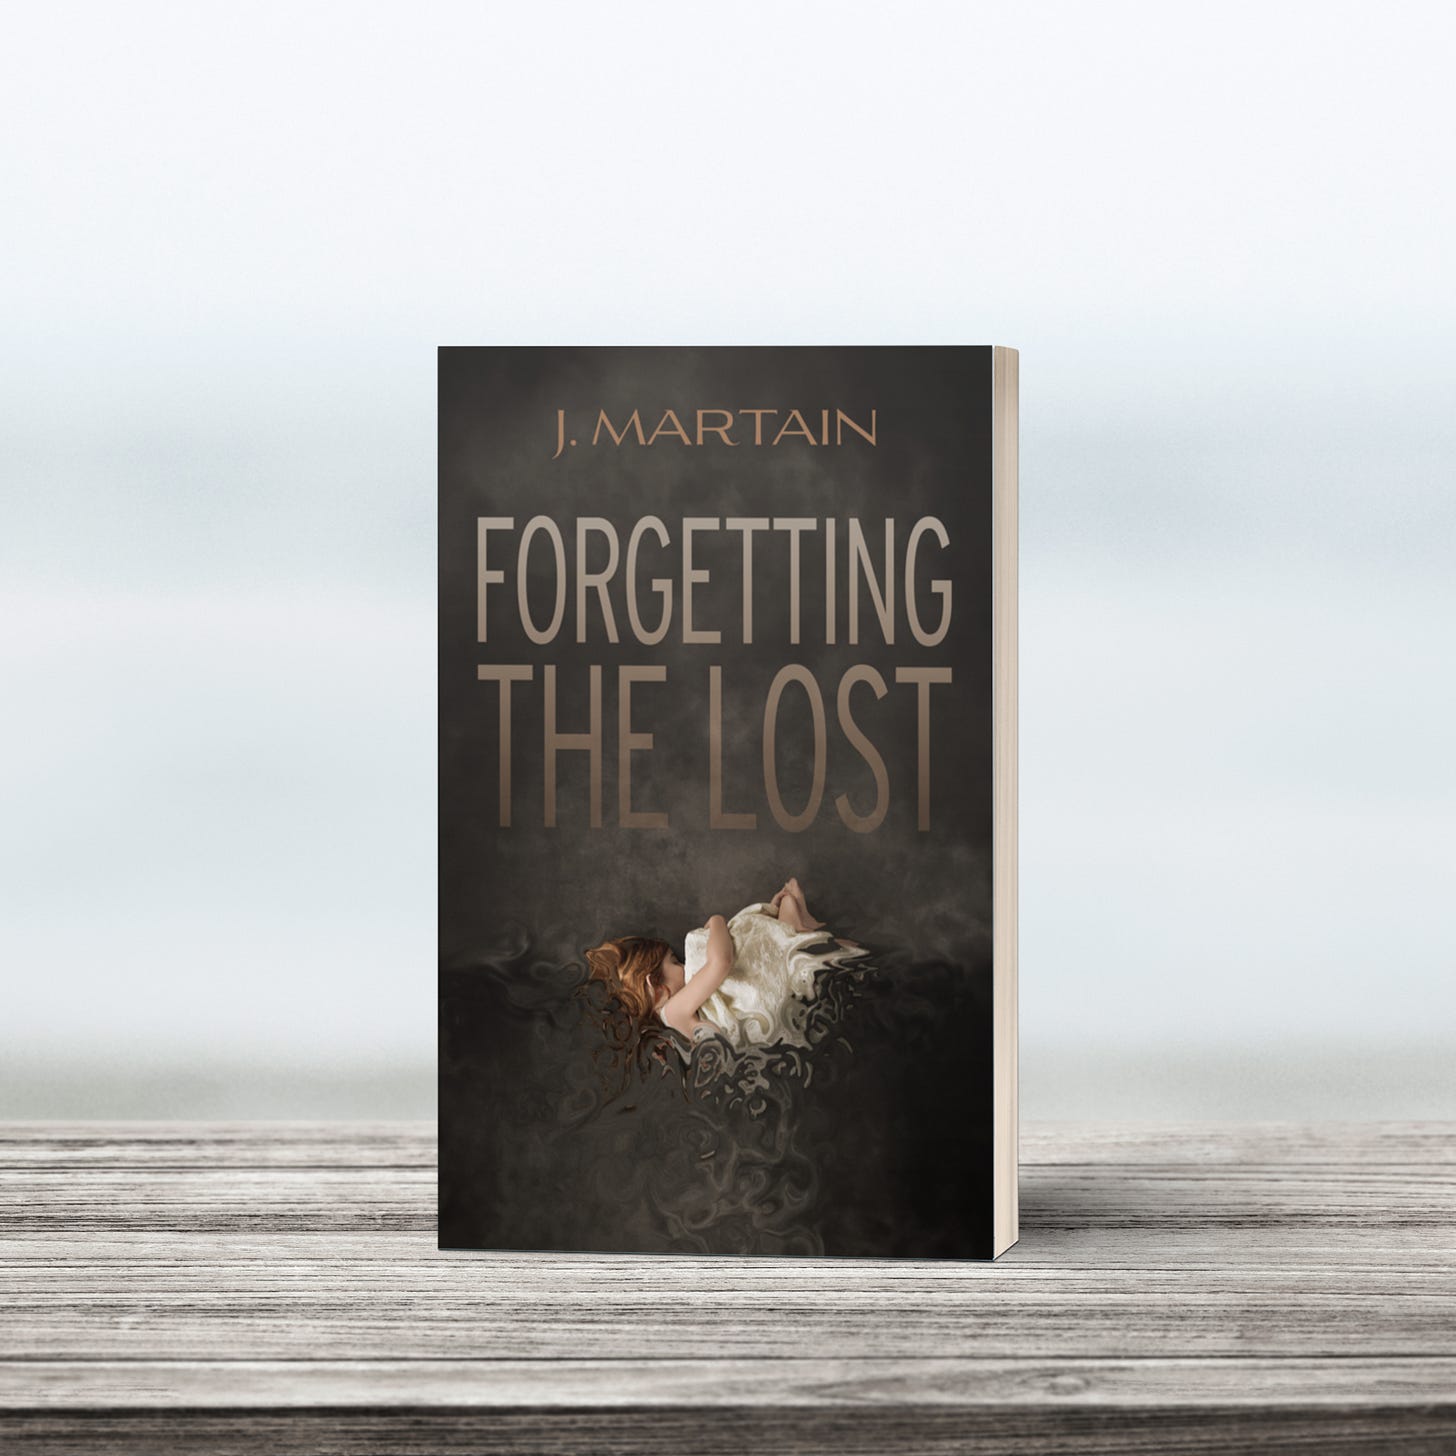 Forgetting the Lost by J. Martain paperback with moody coastal background